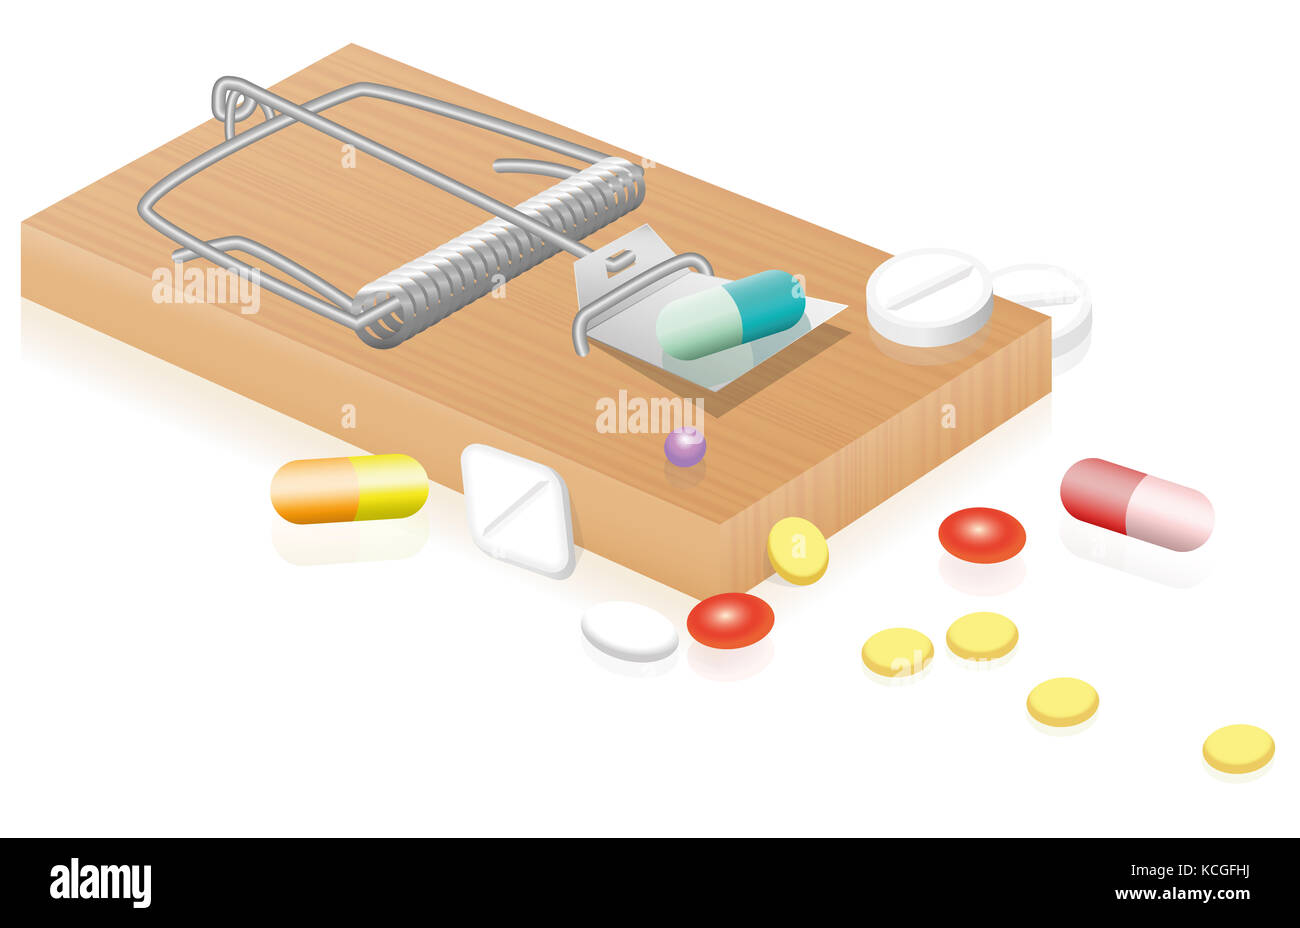 Mouse trap with pills as dangerous, bait for consumers of medicine. Stock Photo